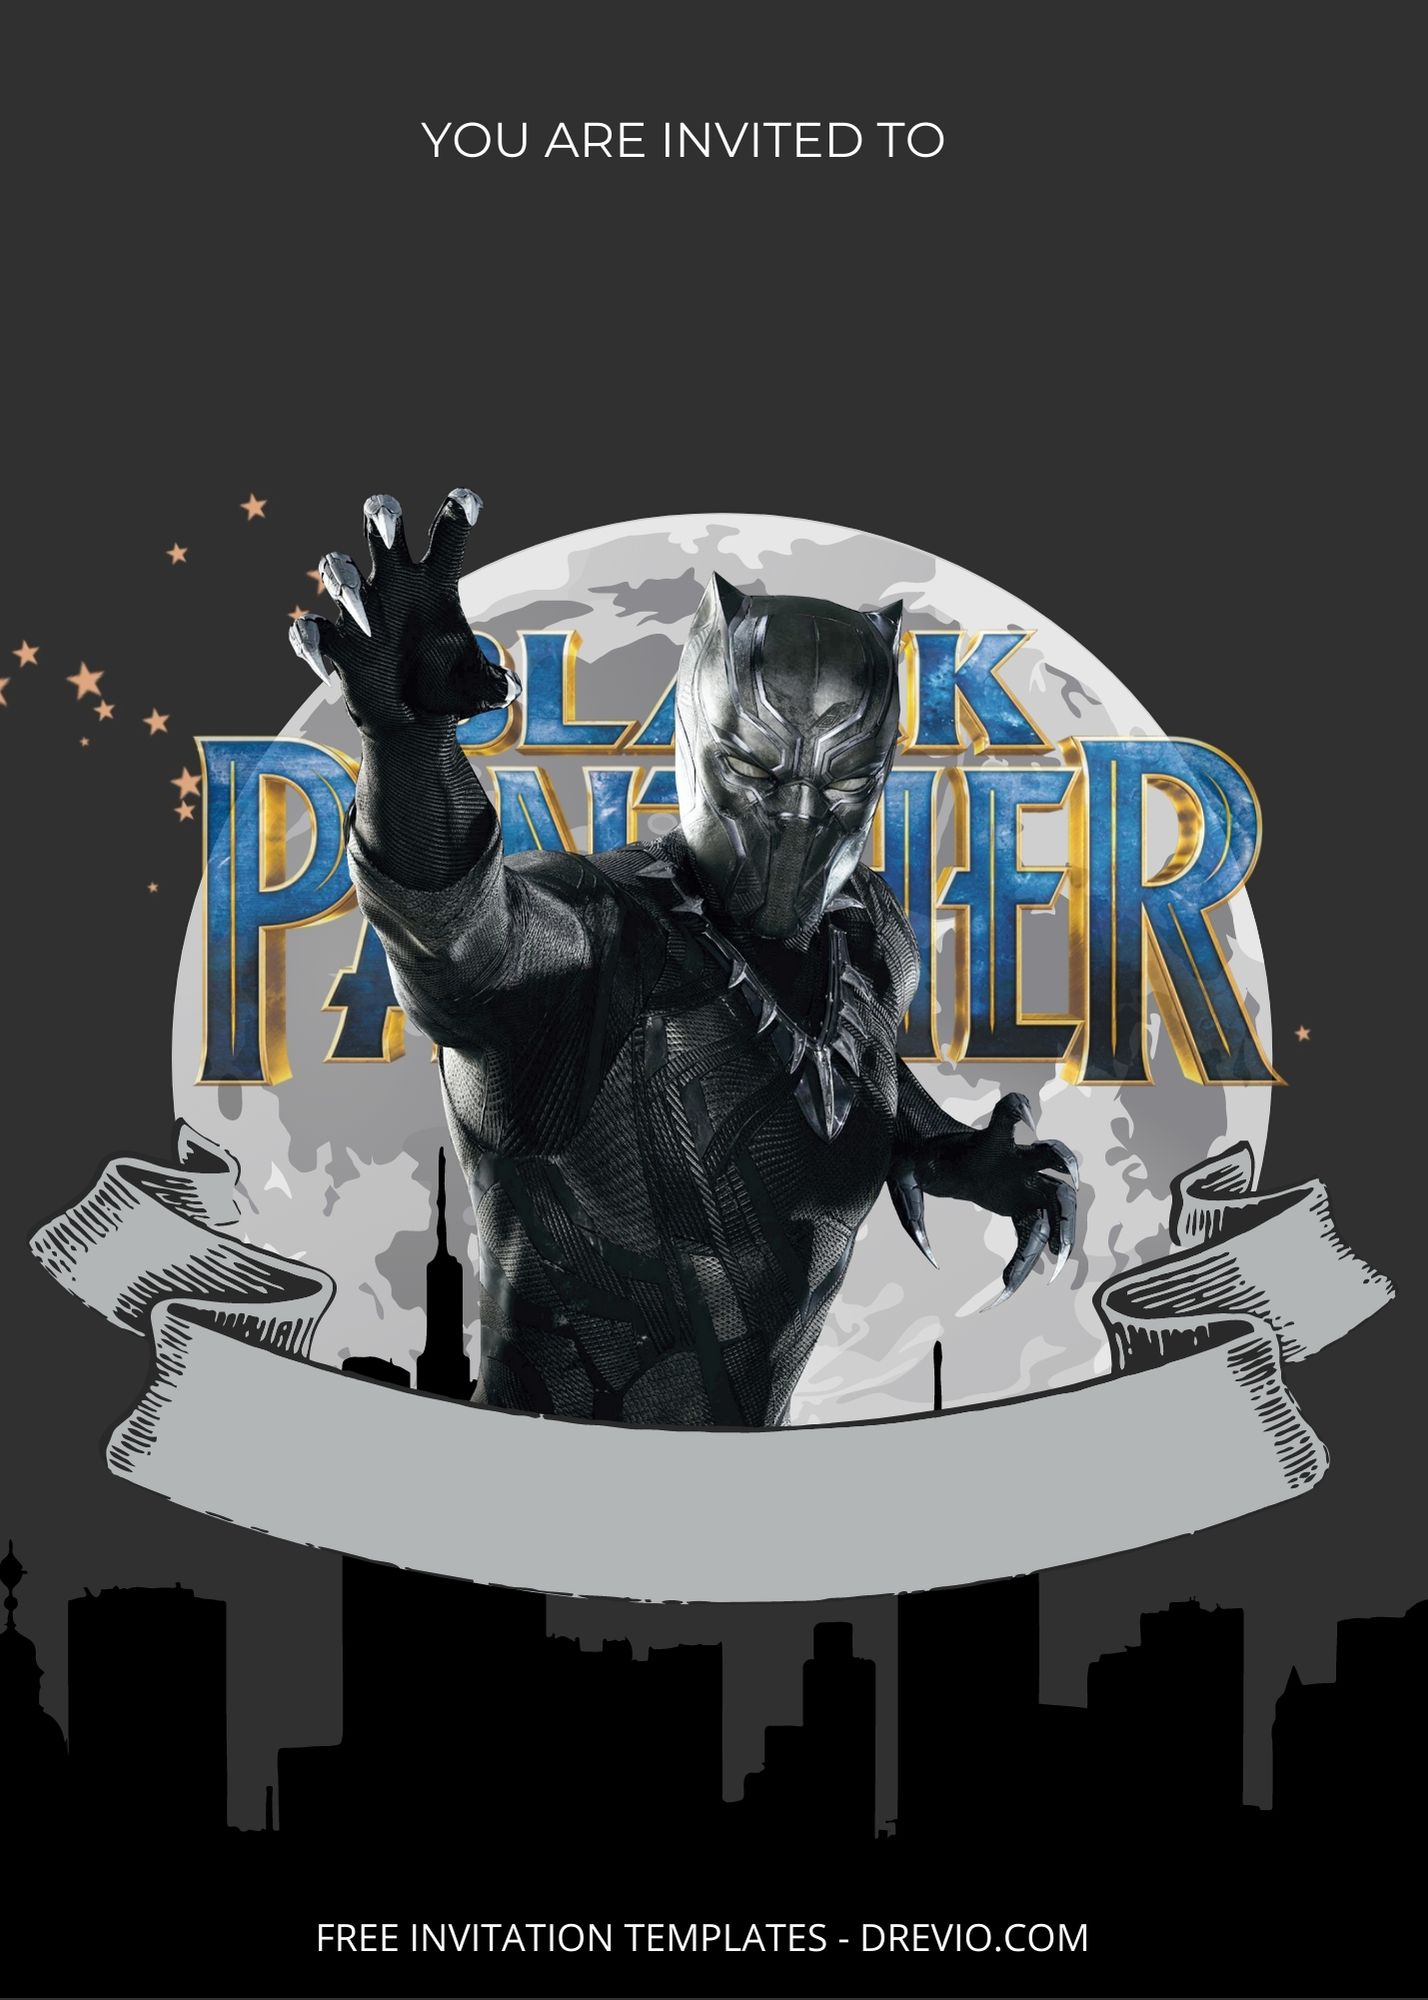 Blank Hail The Black Panther Canva Birthday Invitation Templates Four